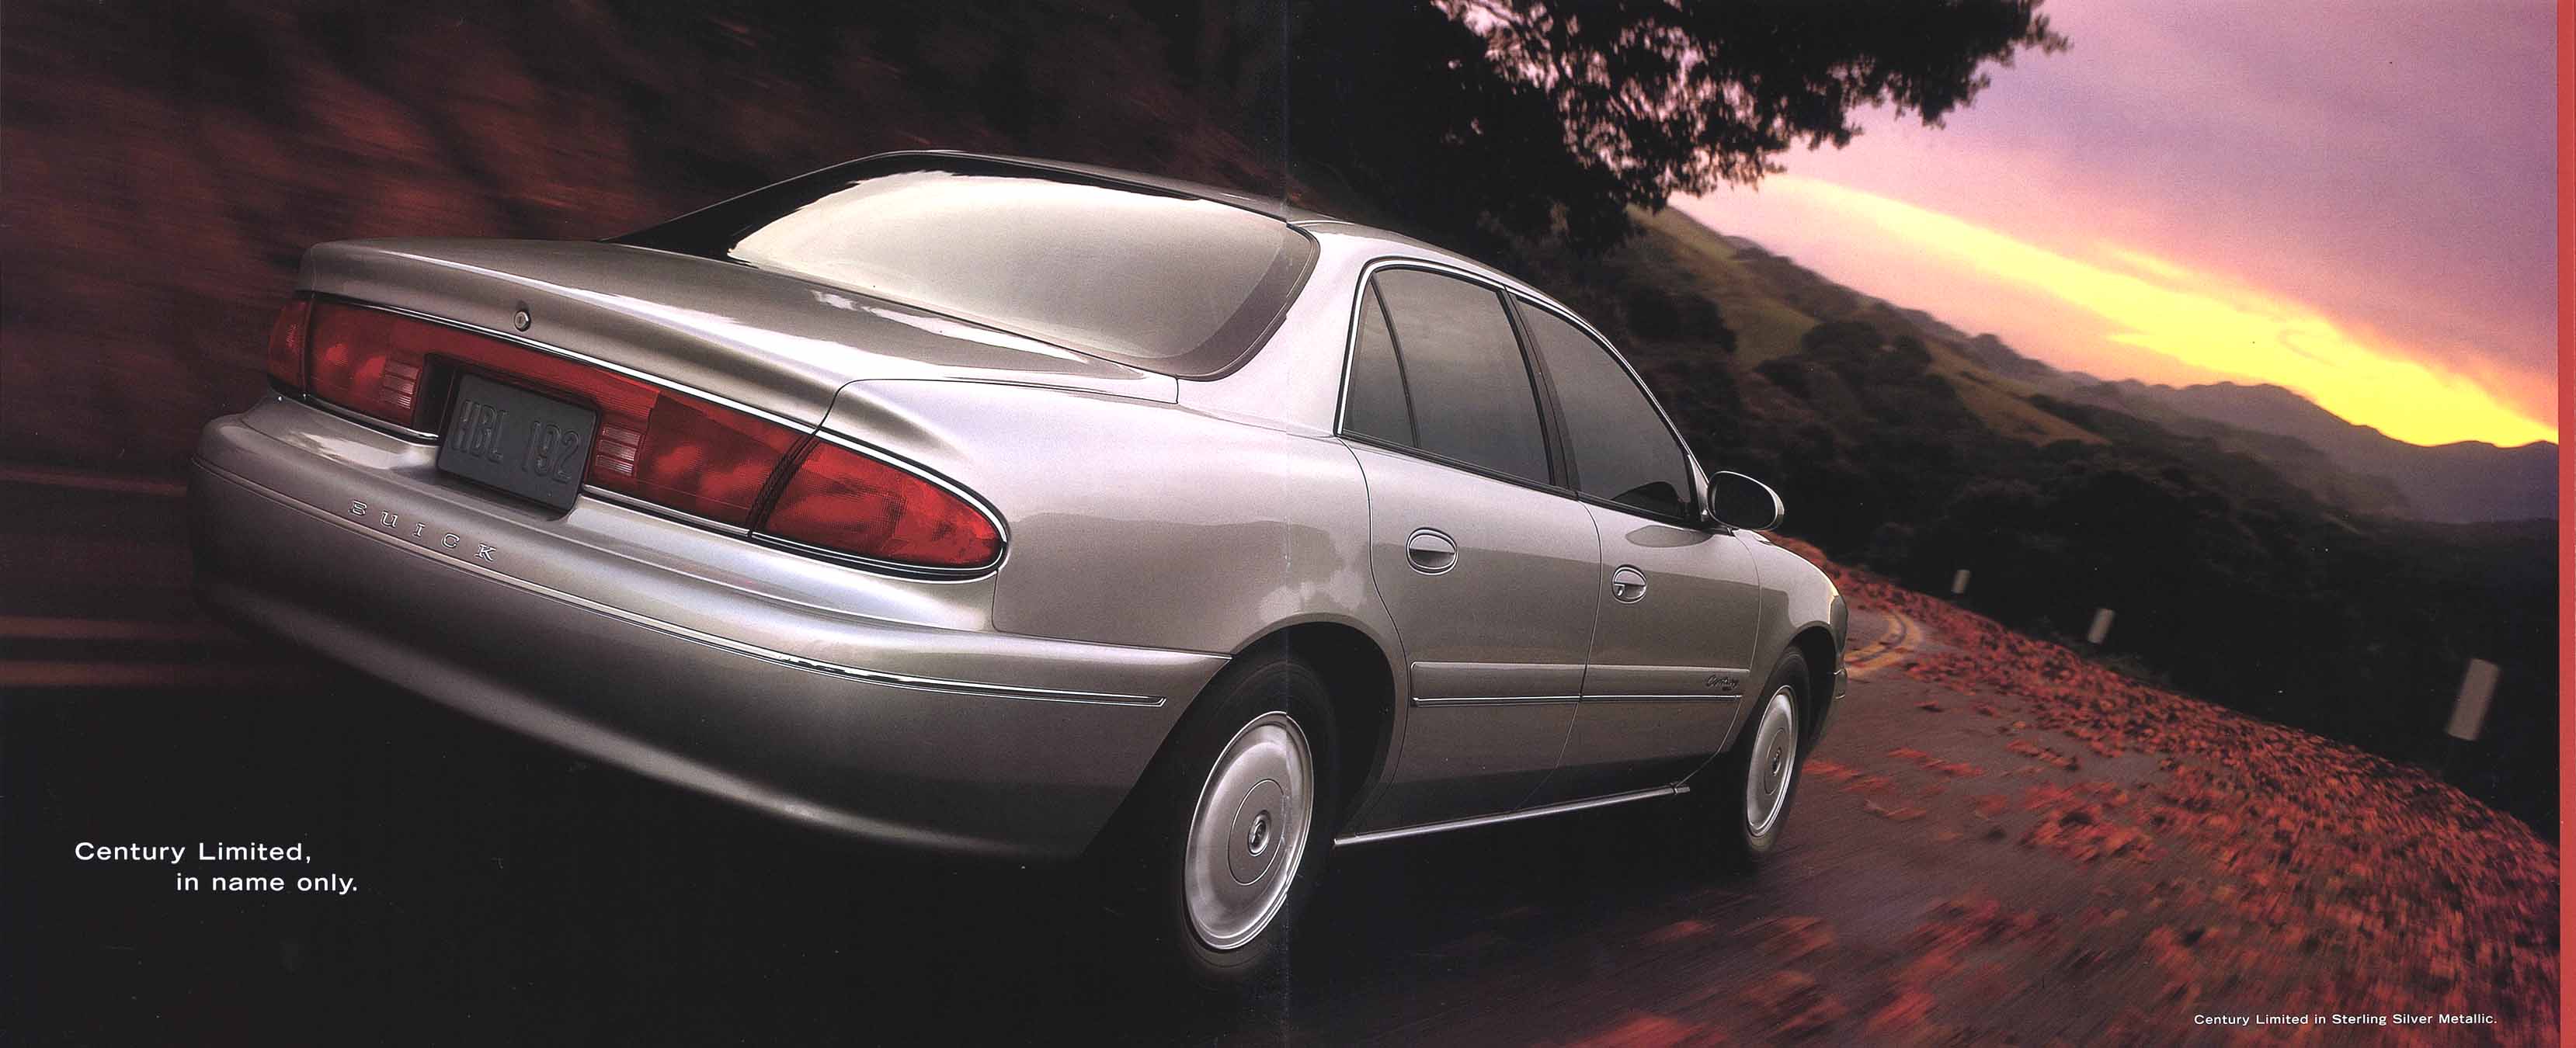 02buickcent20-21